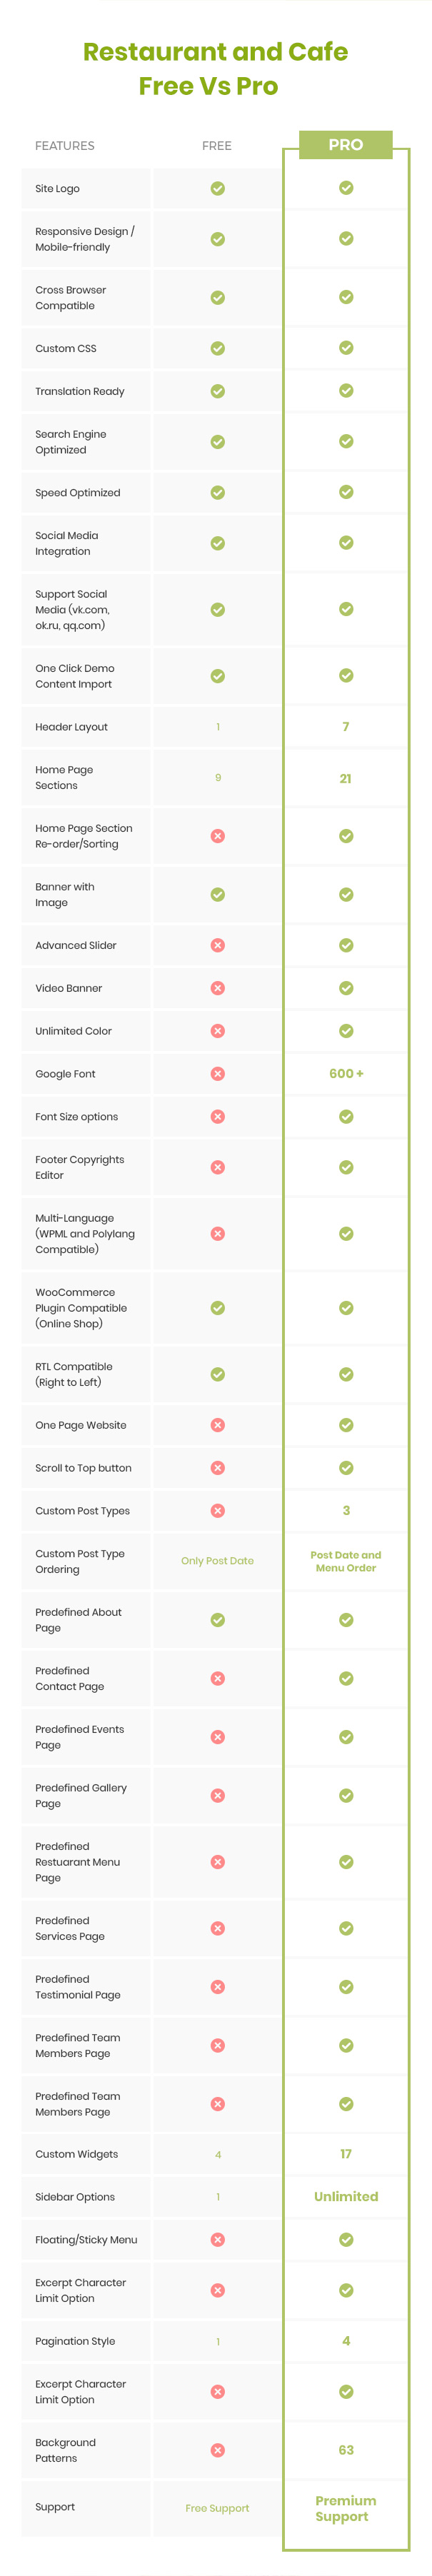 Restaurant and cafe Theme free vs pro-comparison-chart